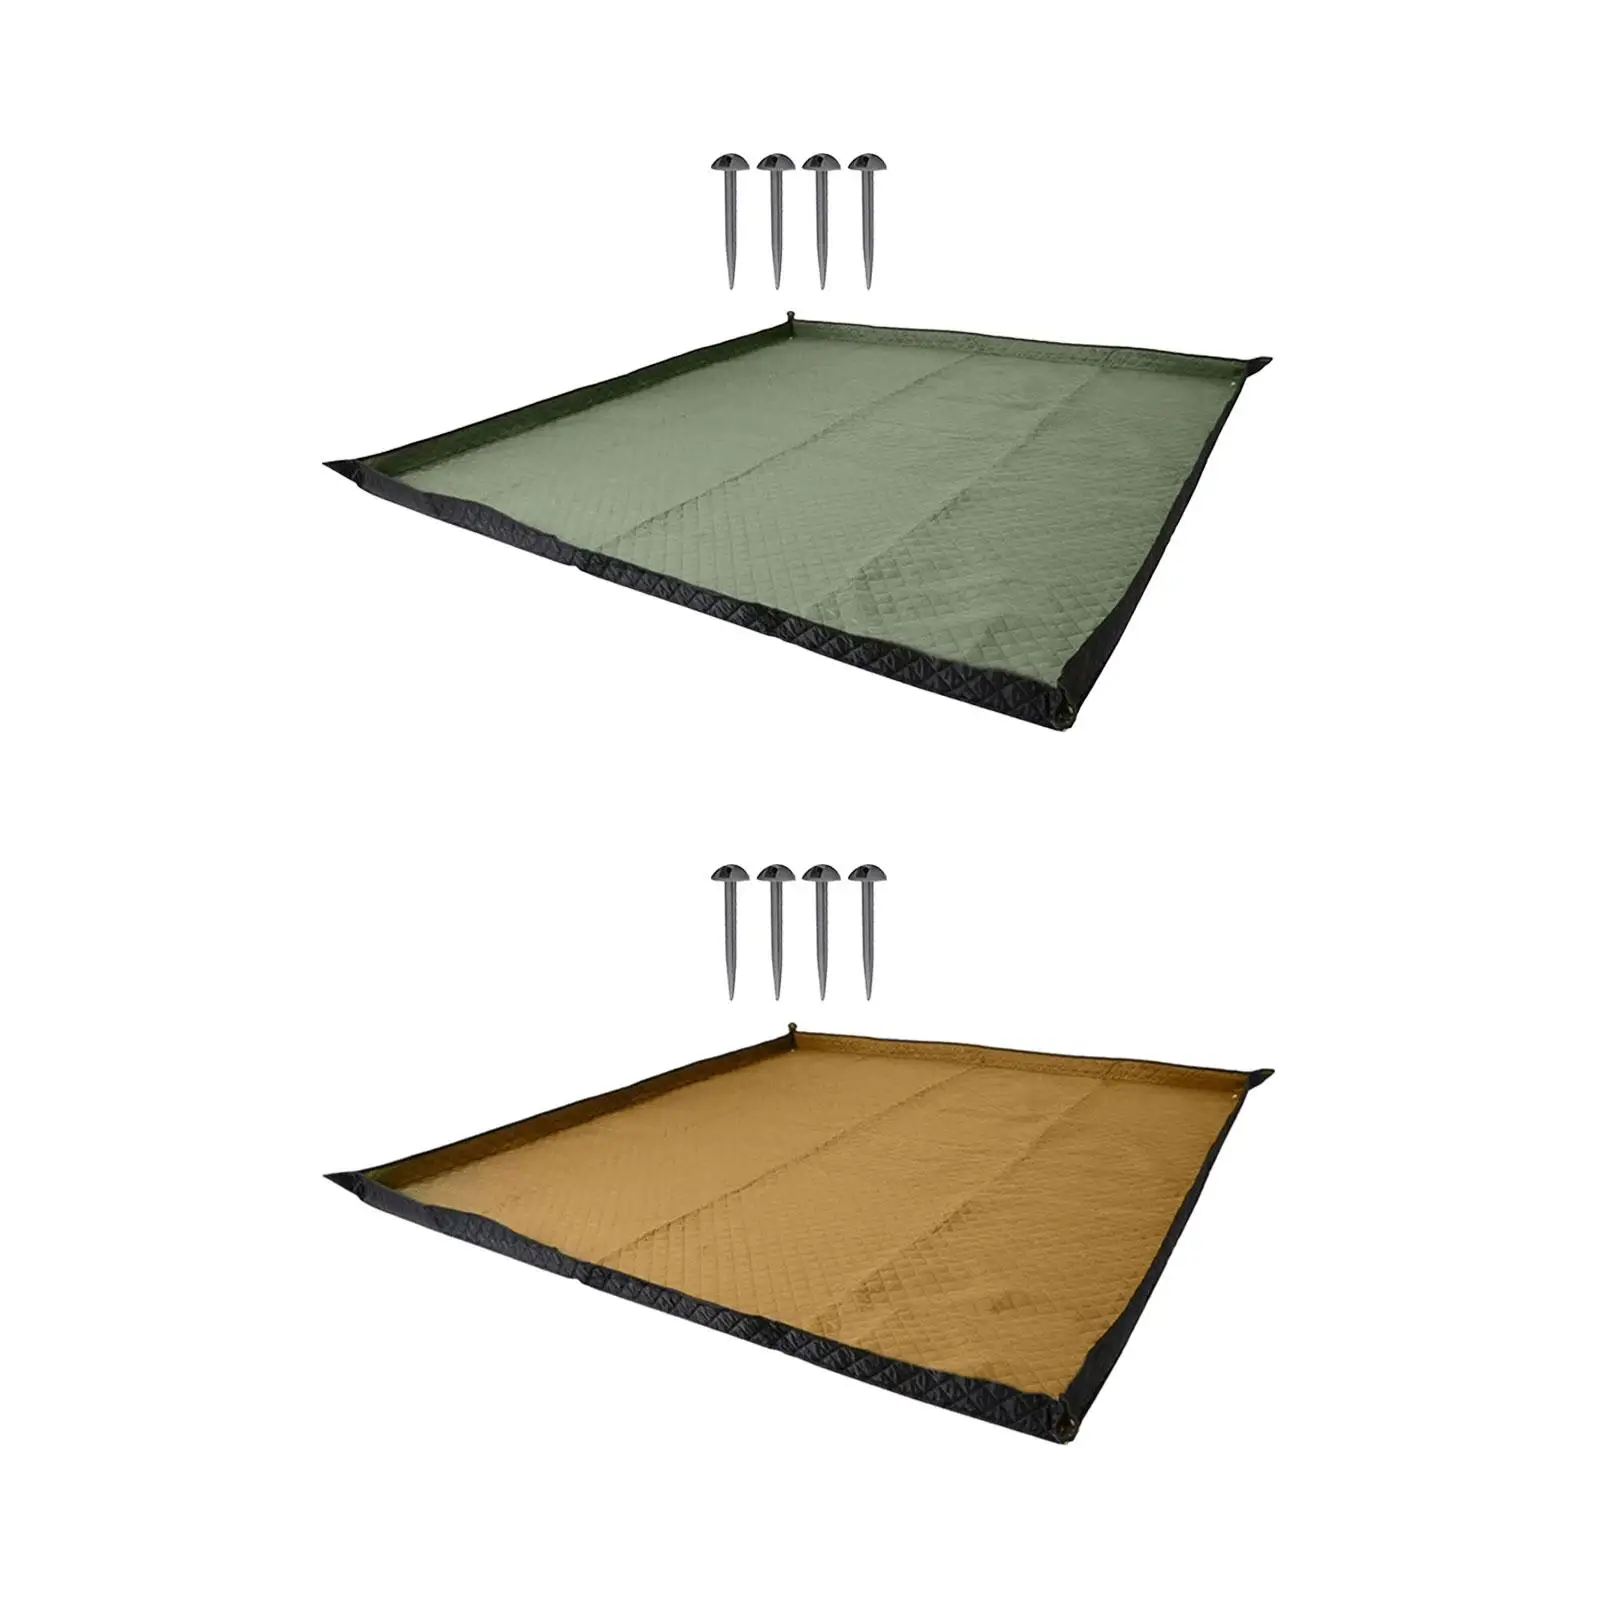 Tent Pad Picnic Blanket Wear Resistant Park Blanket Camping Blanket Sleeping Pad for Backpacking Family Concerts Party Hiking